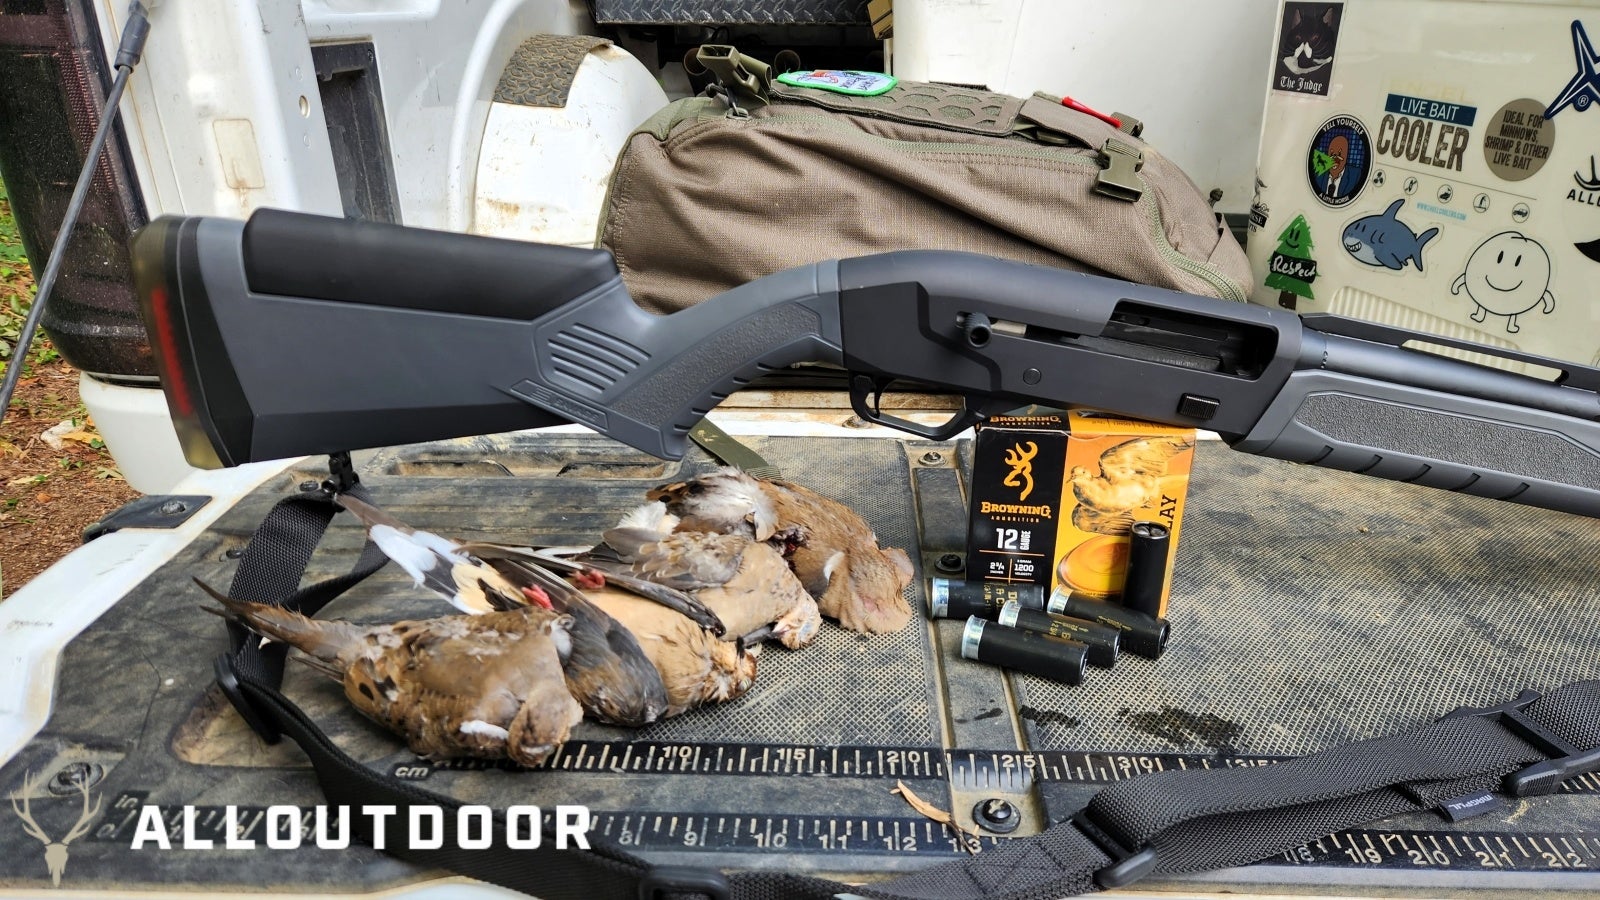 AllOutdoor Review: Savage Arms Renegauge Field